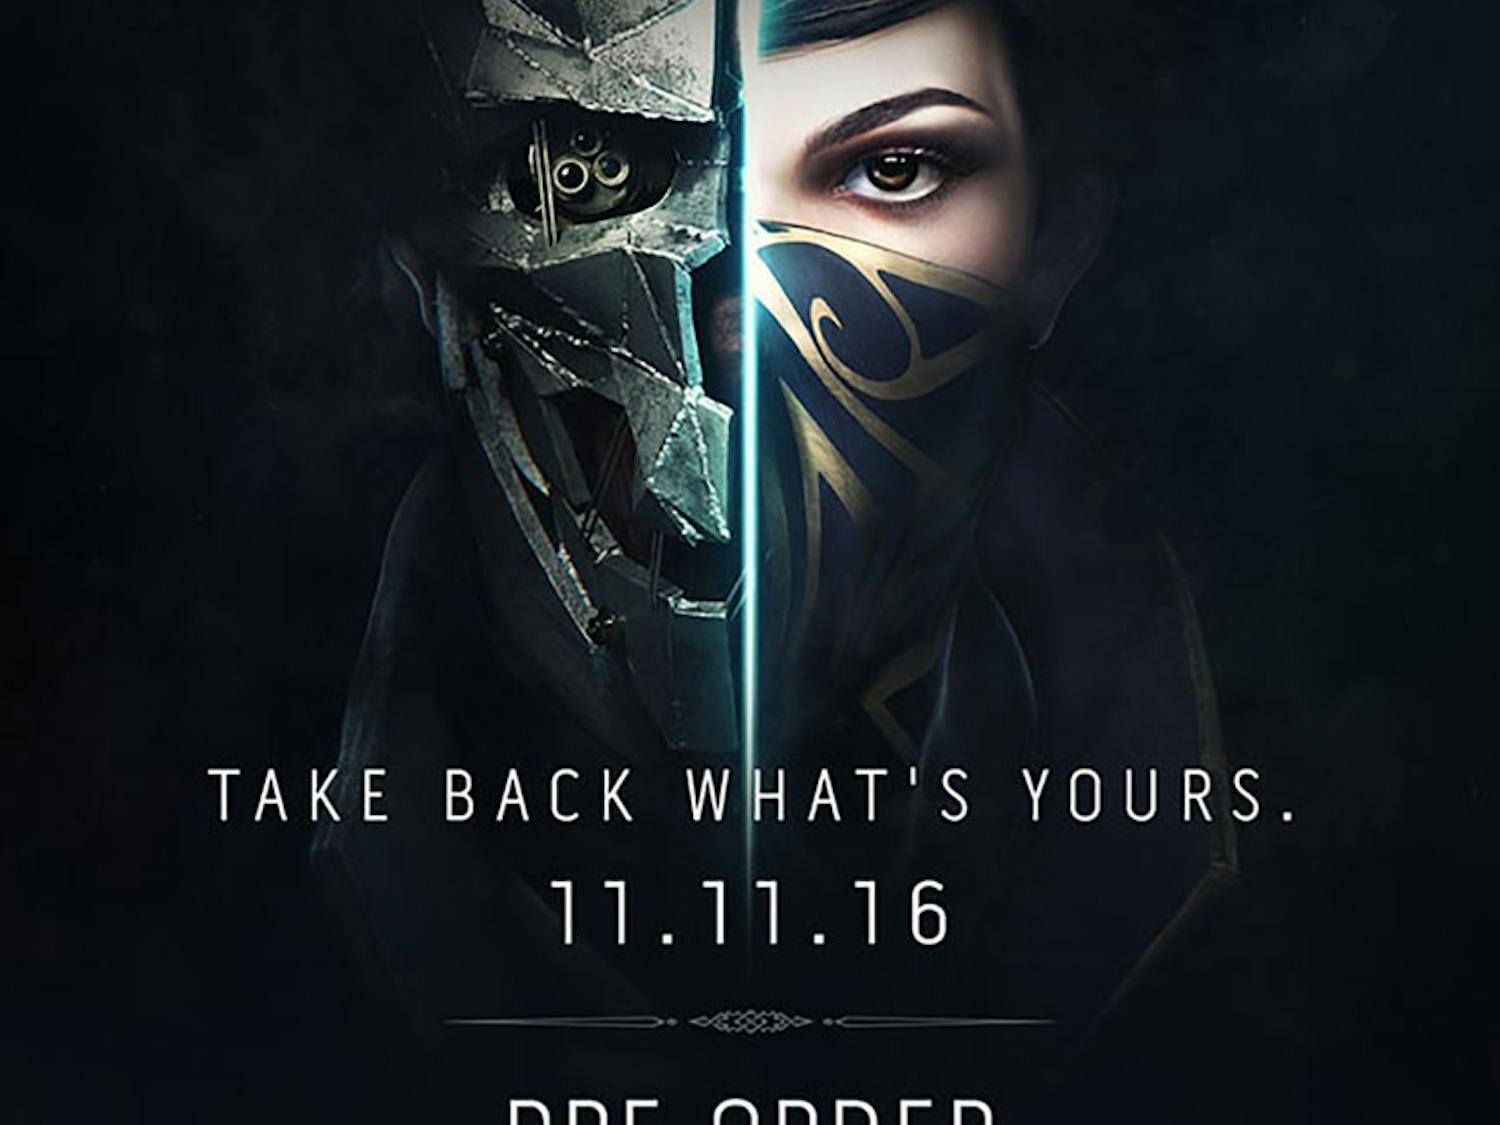 The long awaited sequel to the popular 2012 game “Dishonored” has finally arrived. The game takes place in the city of Karnaca, mimicking the coastline of Greece and Italy.